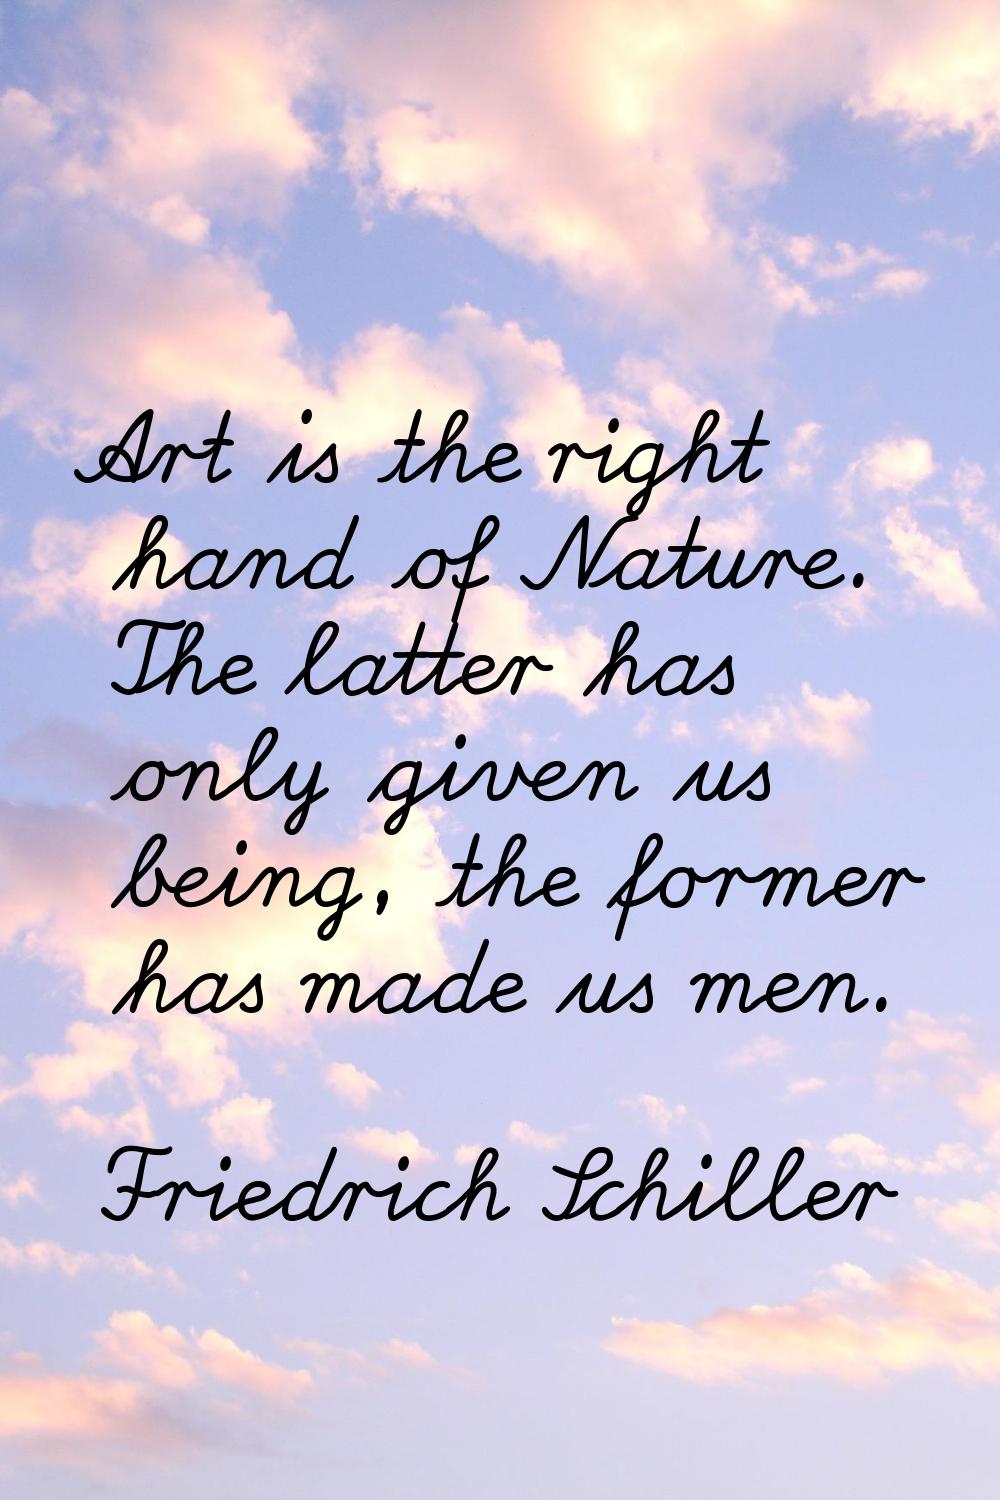 Art is the right hand of Nature. The latter has only given us being, the former has made us men.